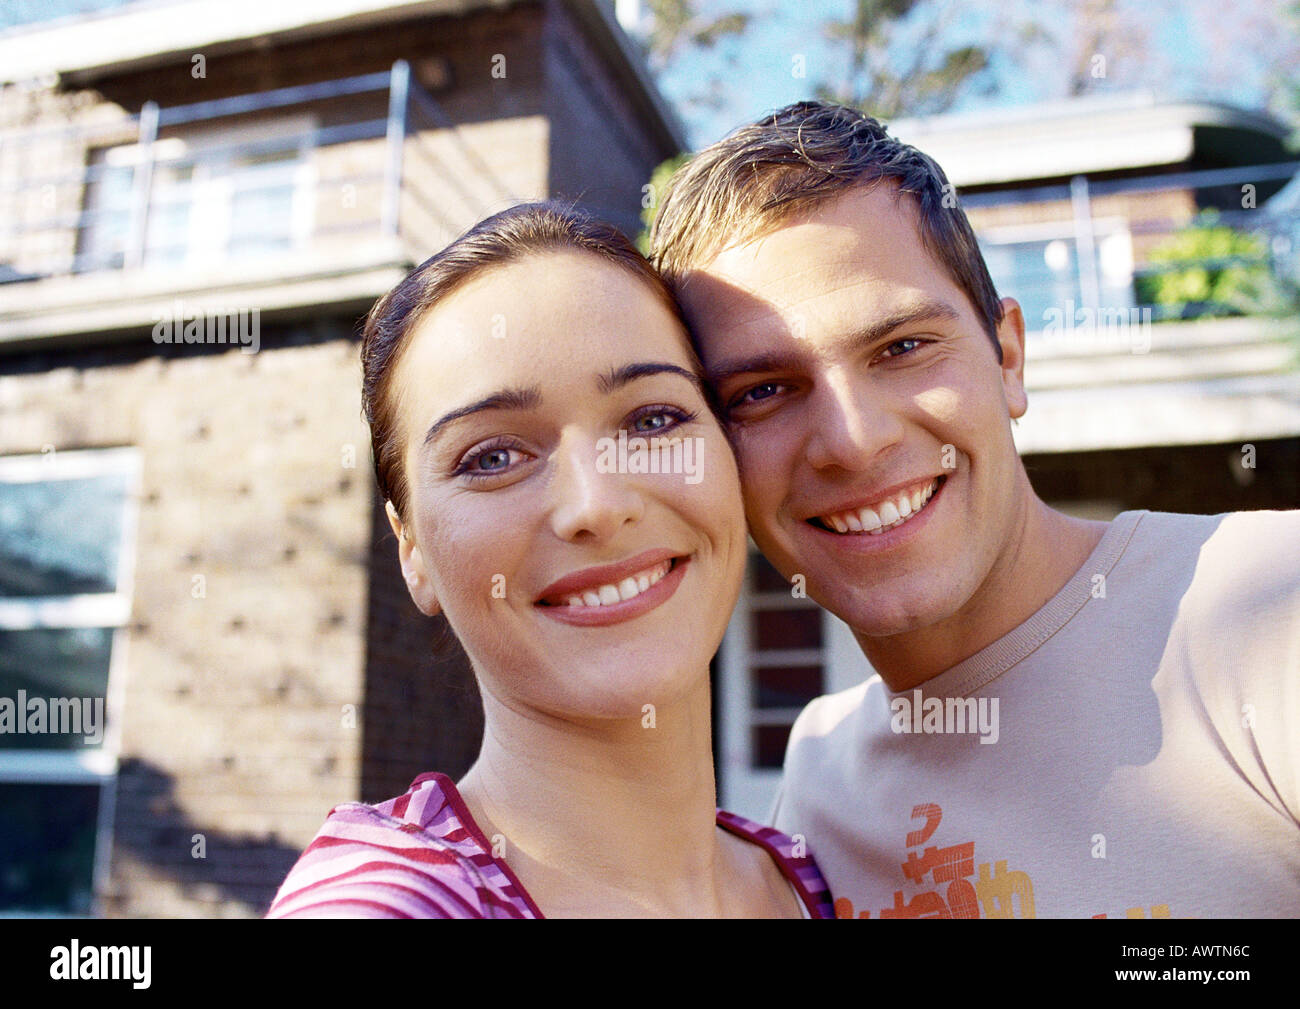 Couple in front of house, smiling, portrait Banque D'Images